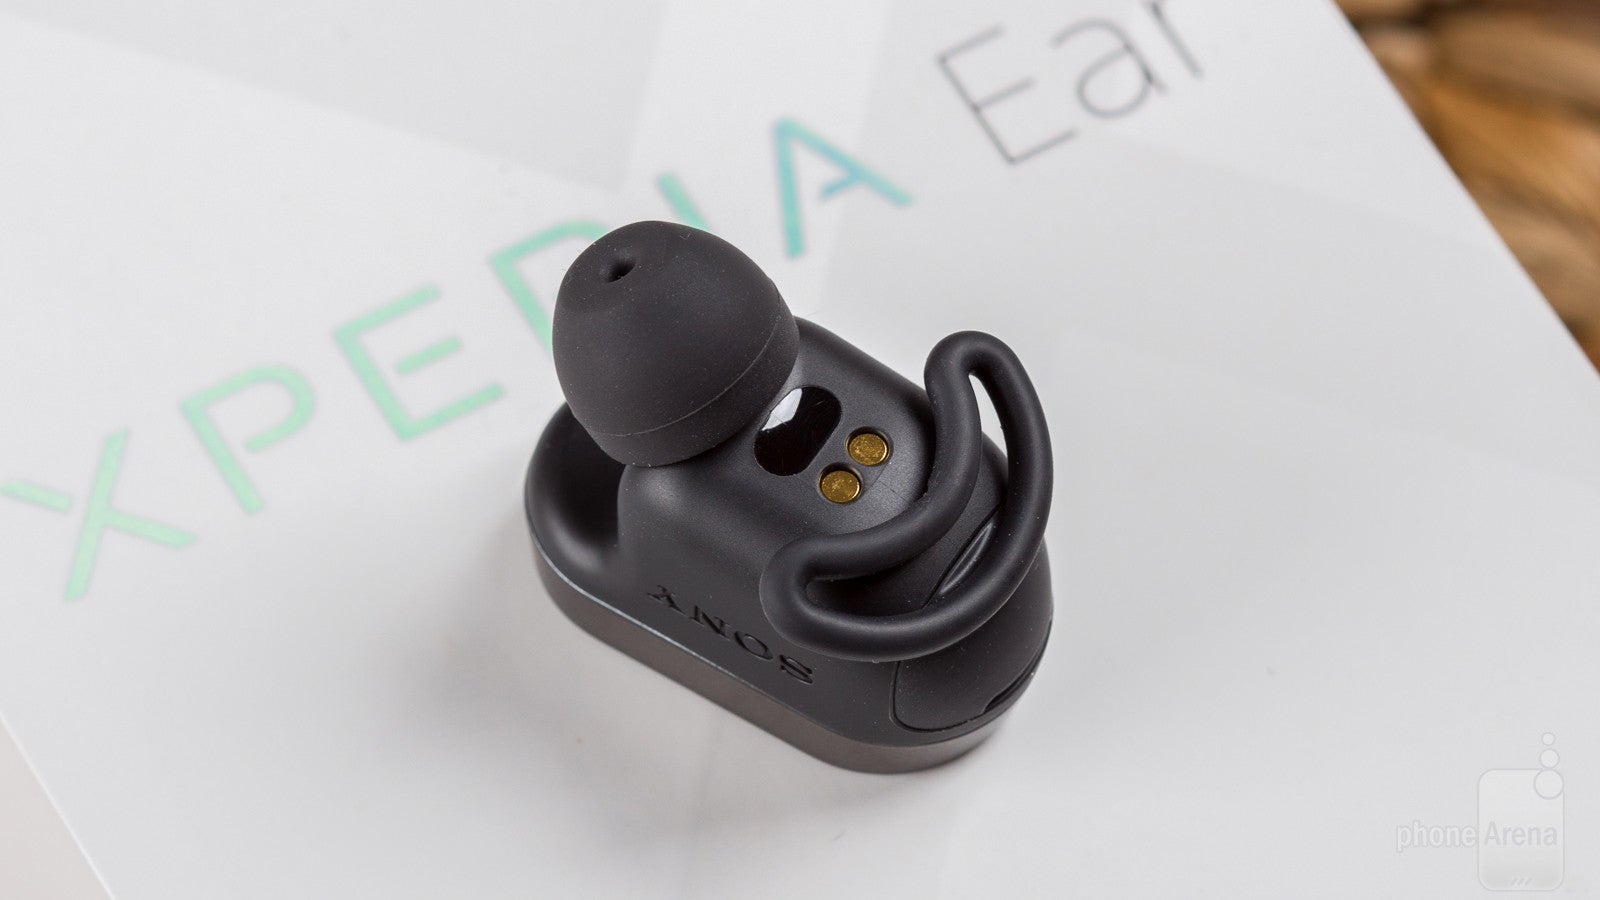 Sony Xperia Ear Bluetooth headset review